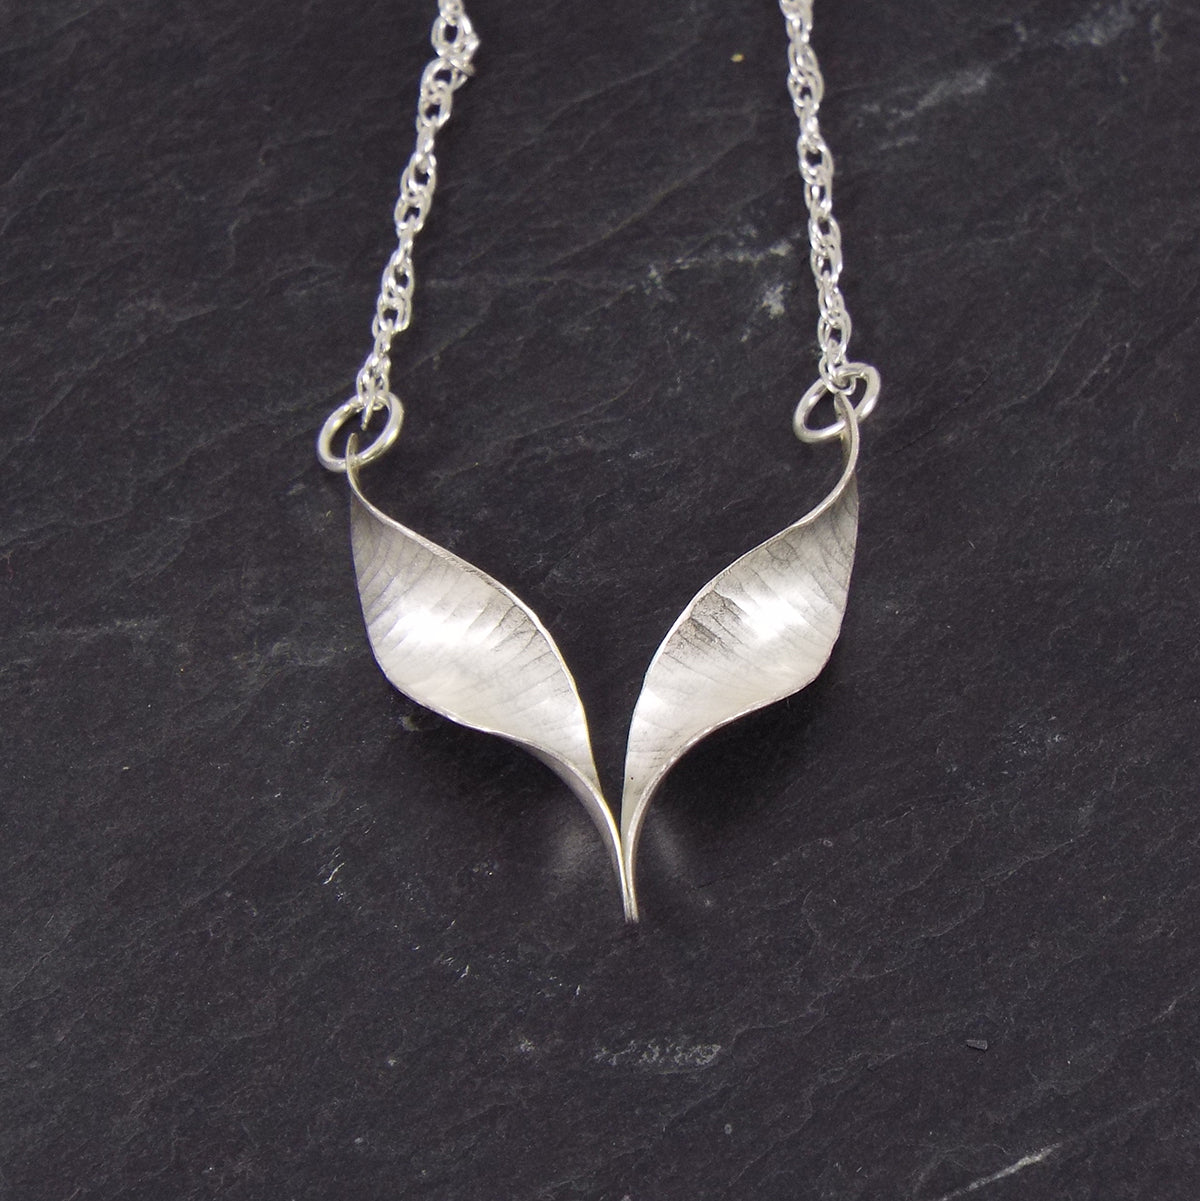 A silver bird necklace made from two mirror-image twisted and curled units soldered at the lower point and attached to a silver rope chain by a silver jump ring at each outer point.